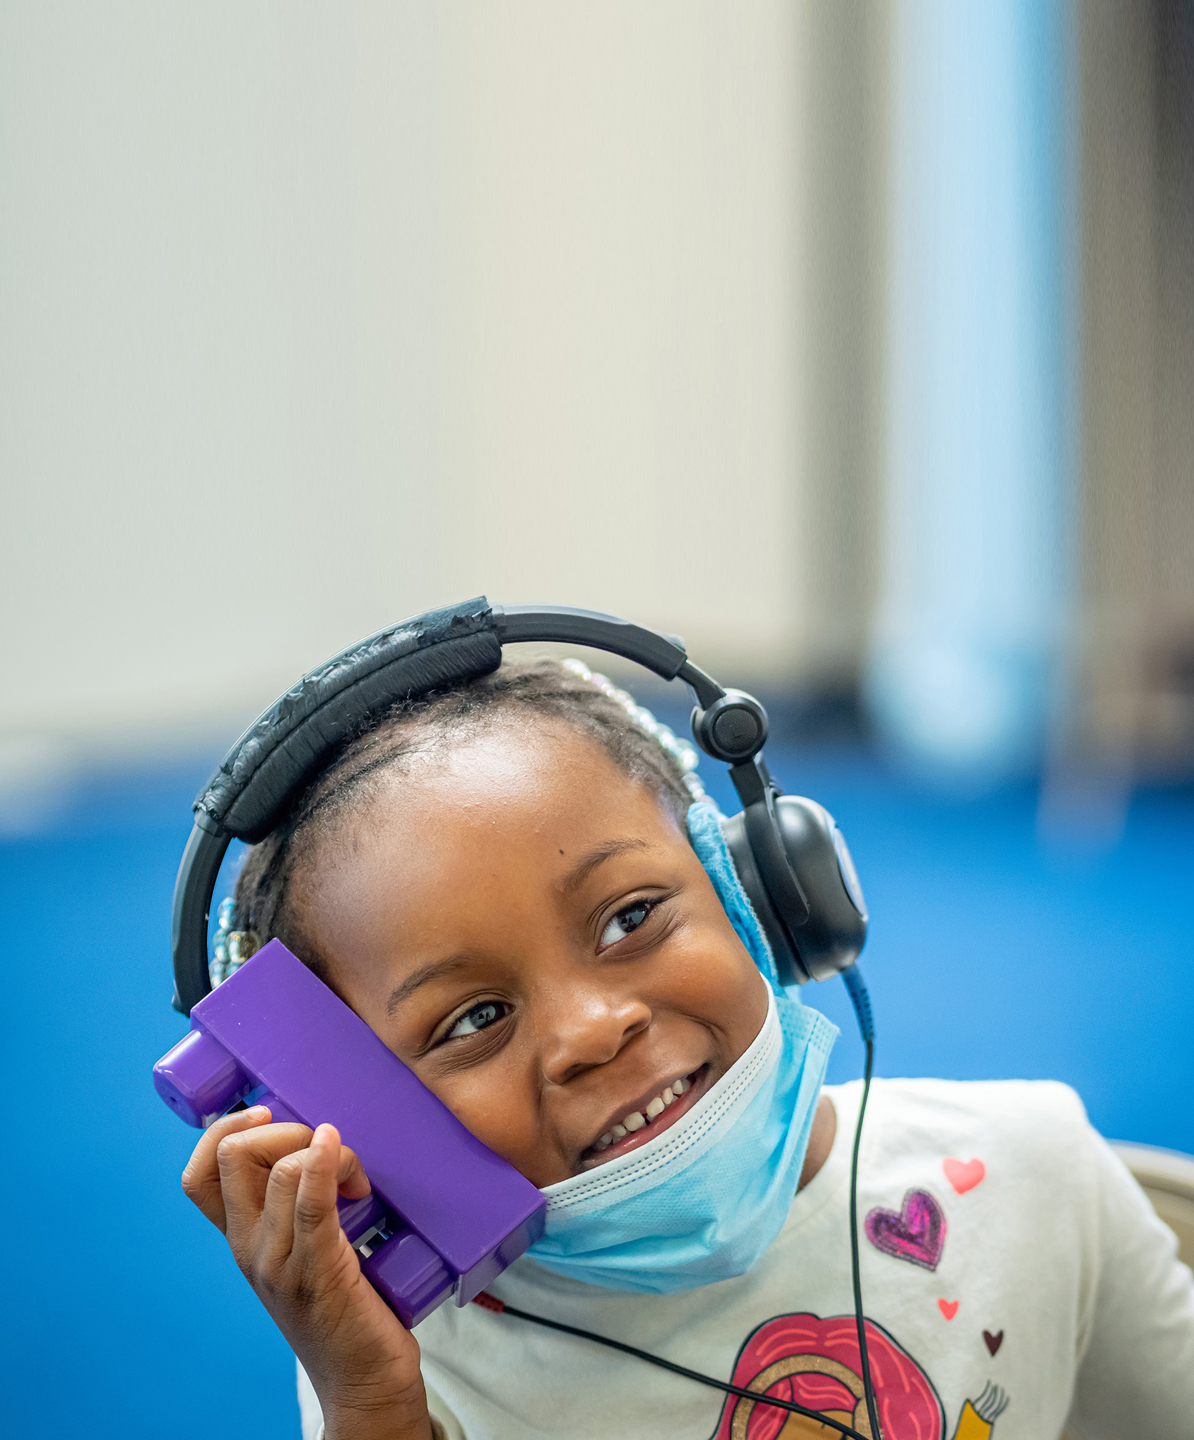 young child holding block while wearing headphones